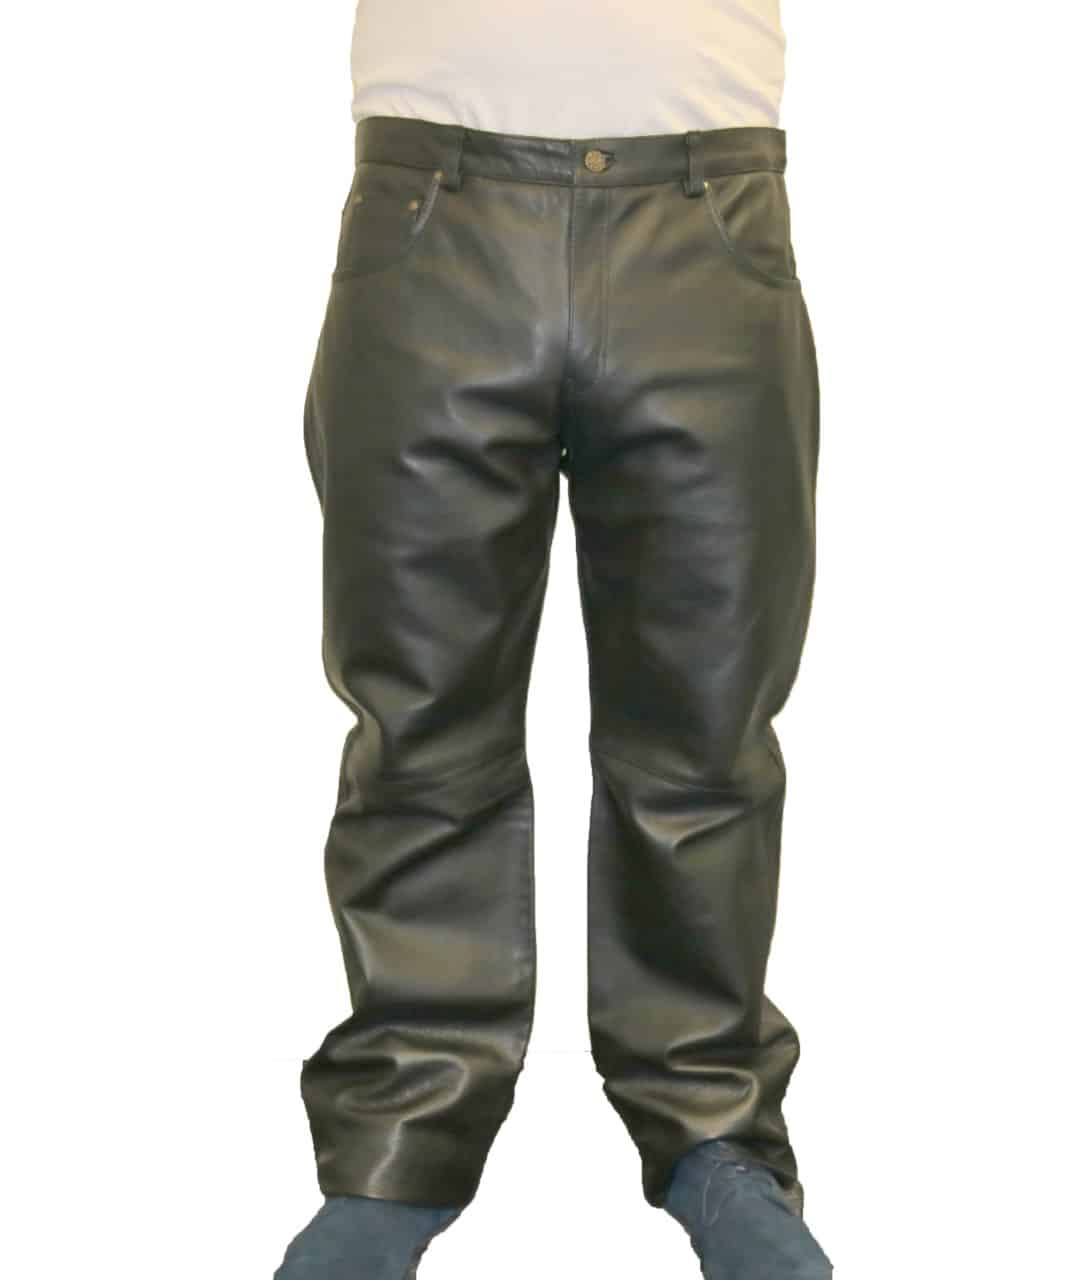 Leather Pants for Men and Women - Motorcycle Leather Pants